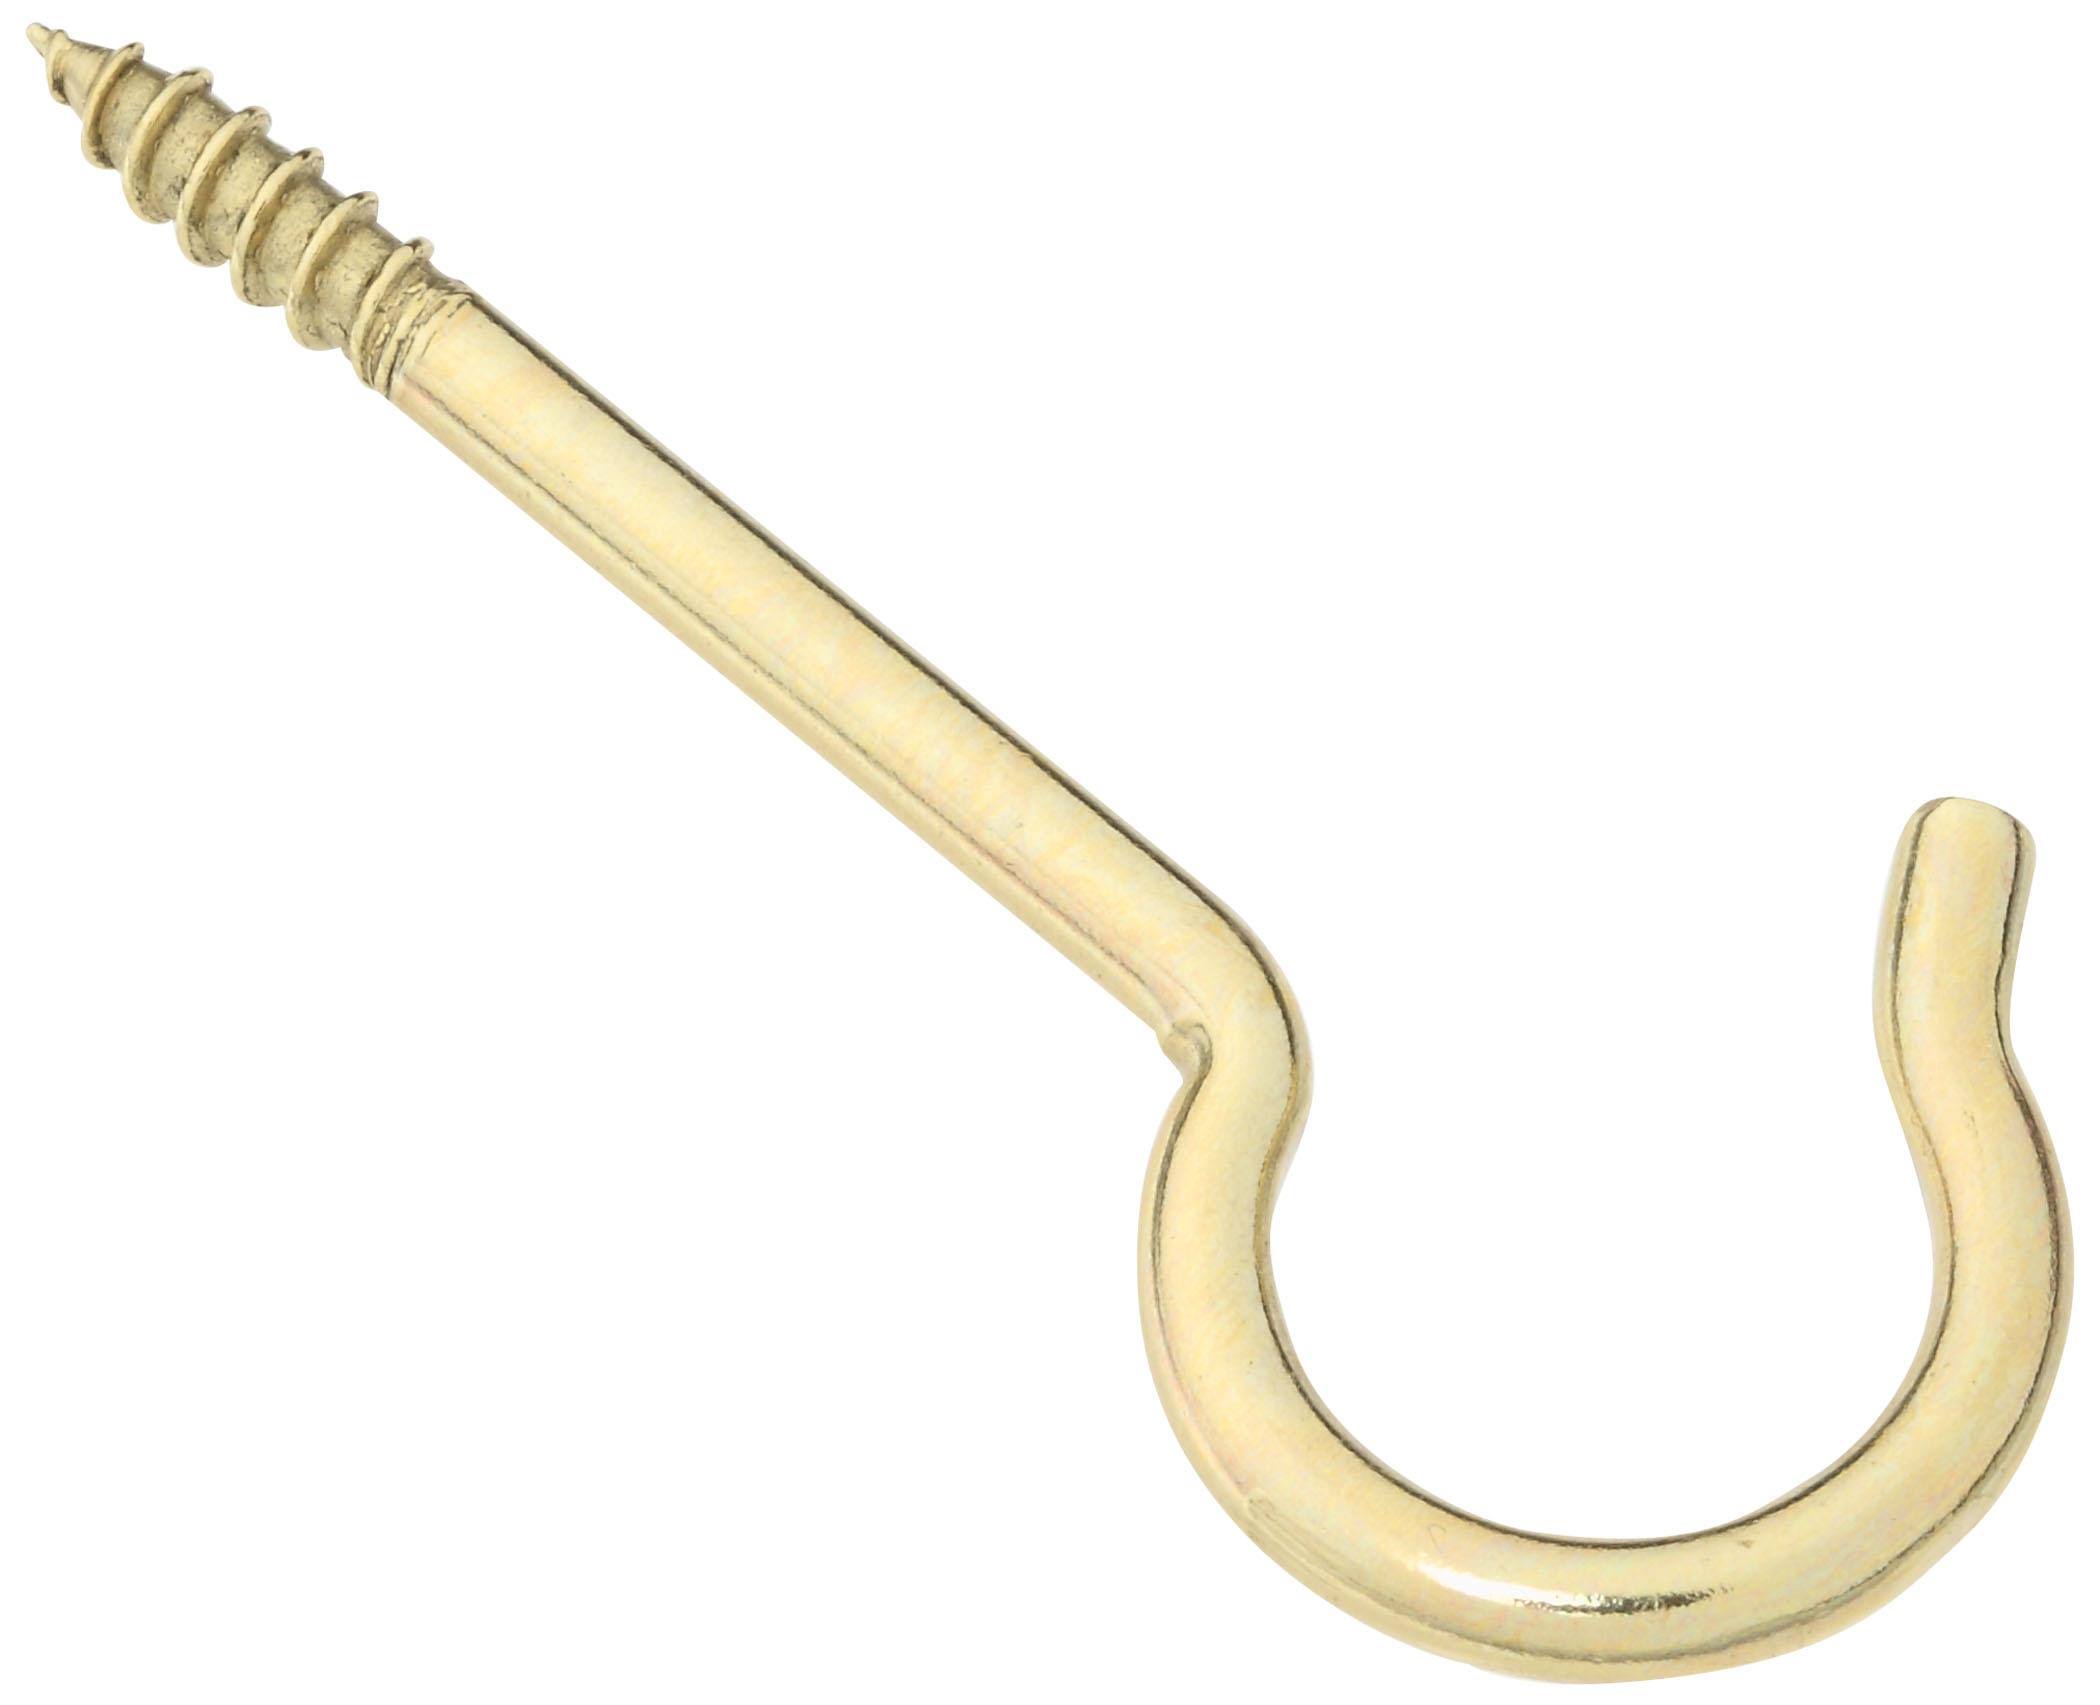 National Hardware Solid Brass Ceiling Hook - 6pc, 3 3/8"